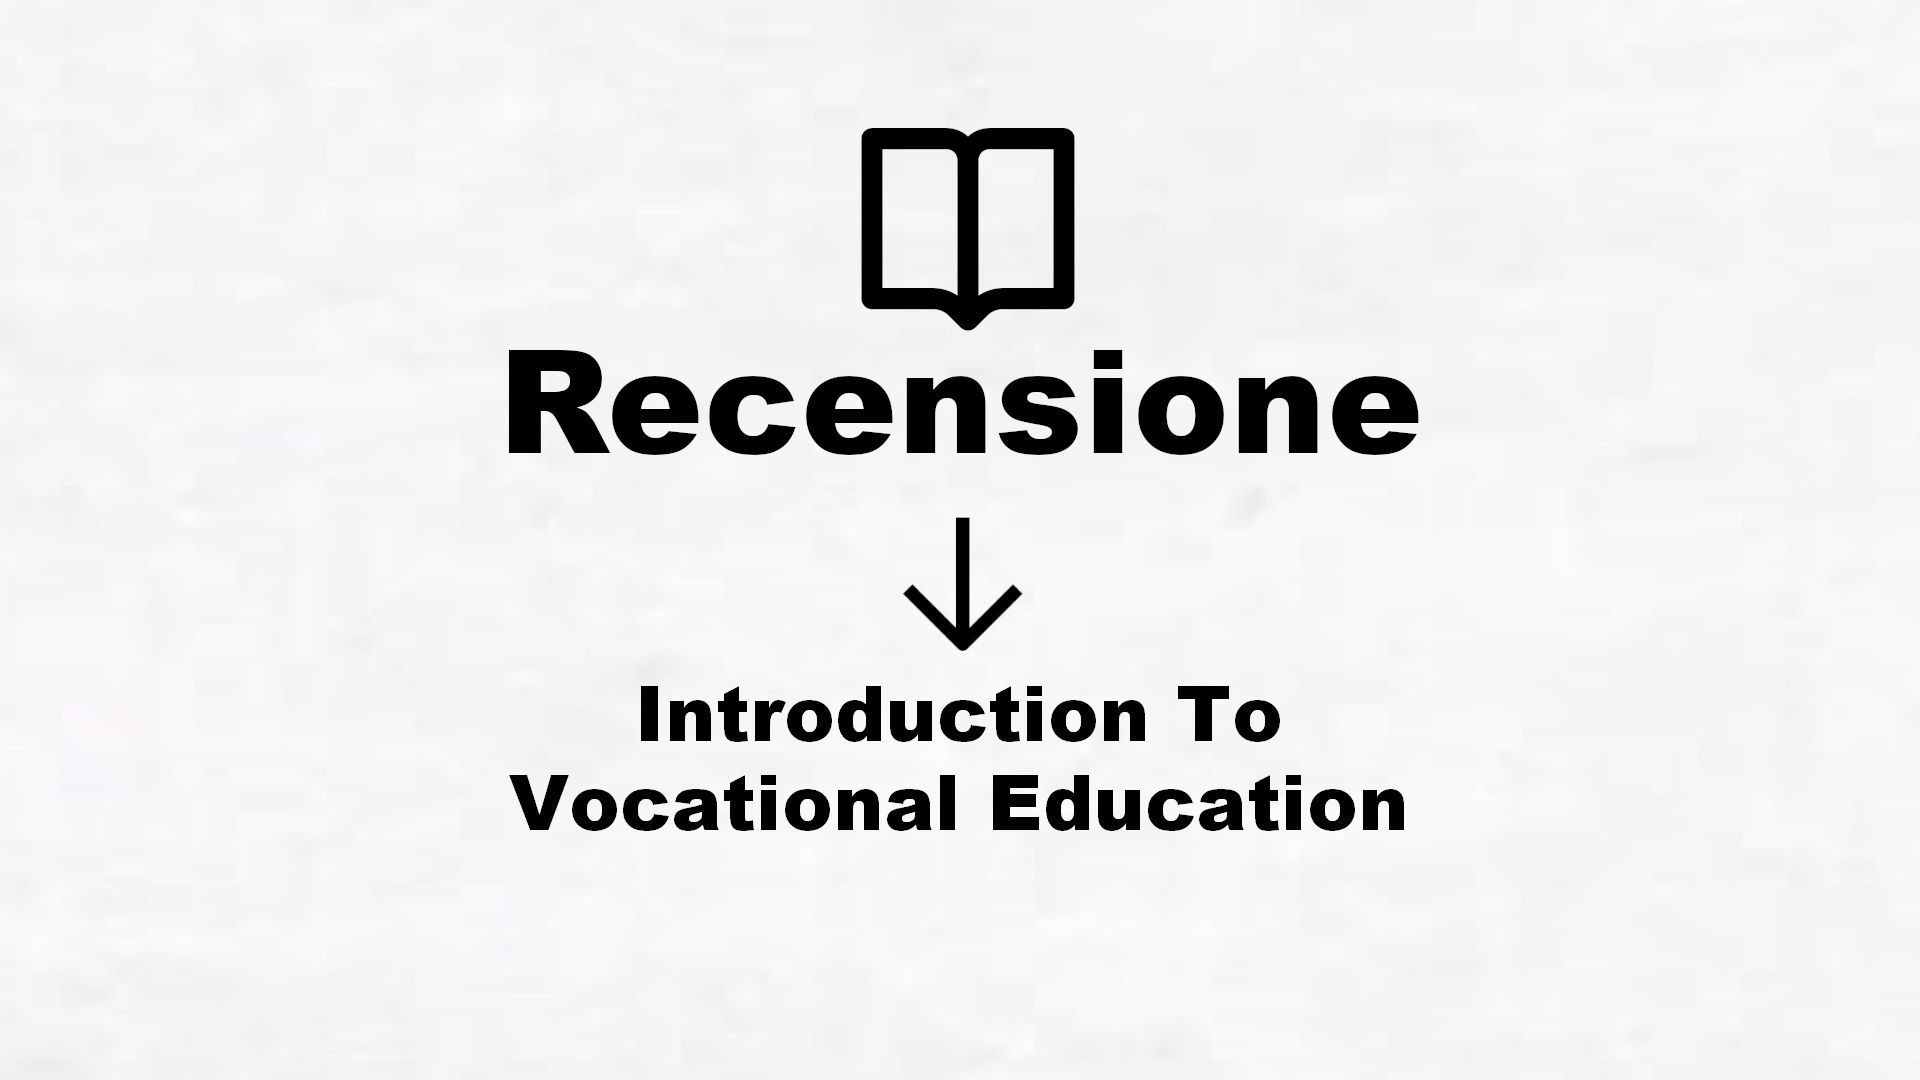 Introduction To Vocational Education – Recensione Libro